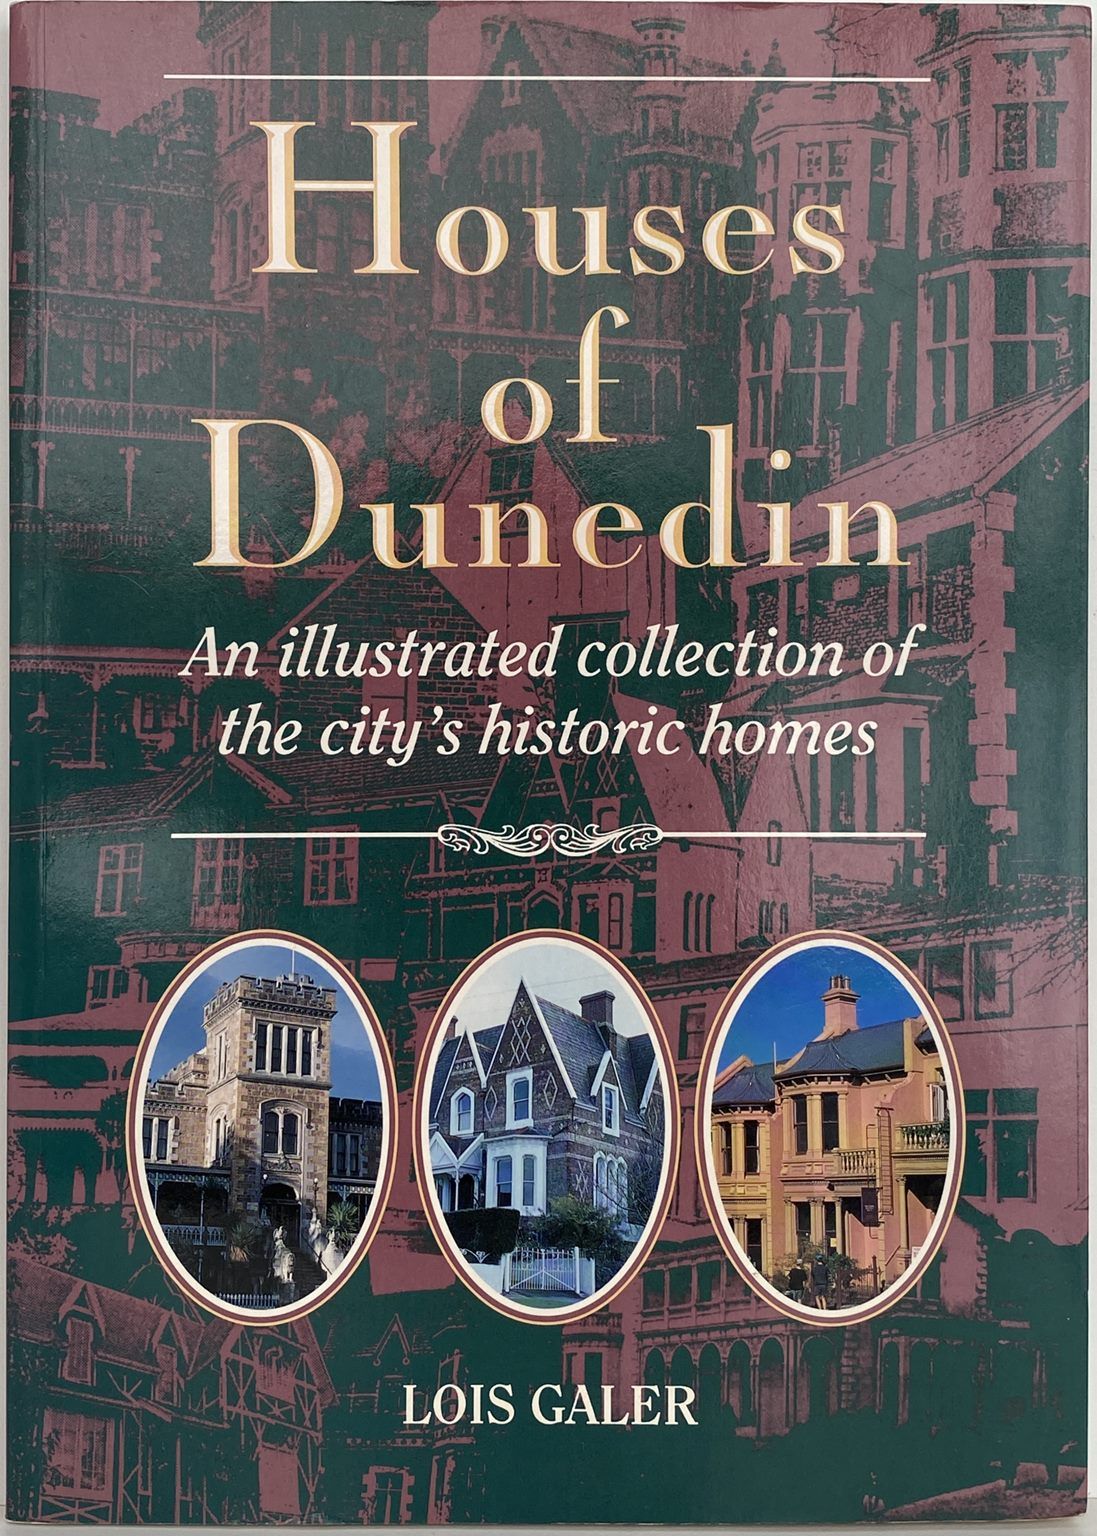 HOUSES of DUNEDIN: An illustrated collection of the city's historic Homes